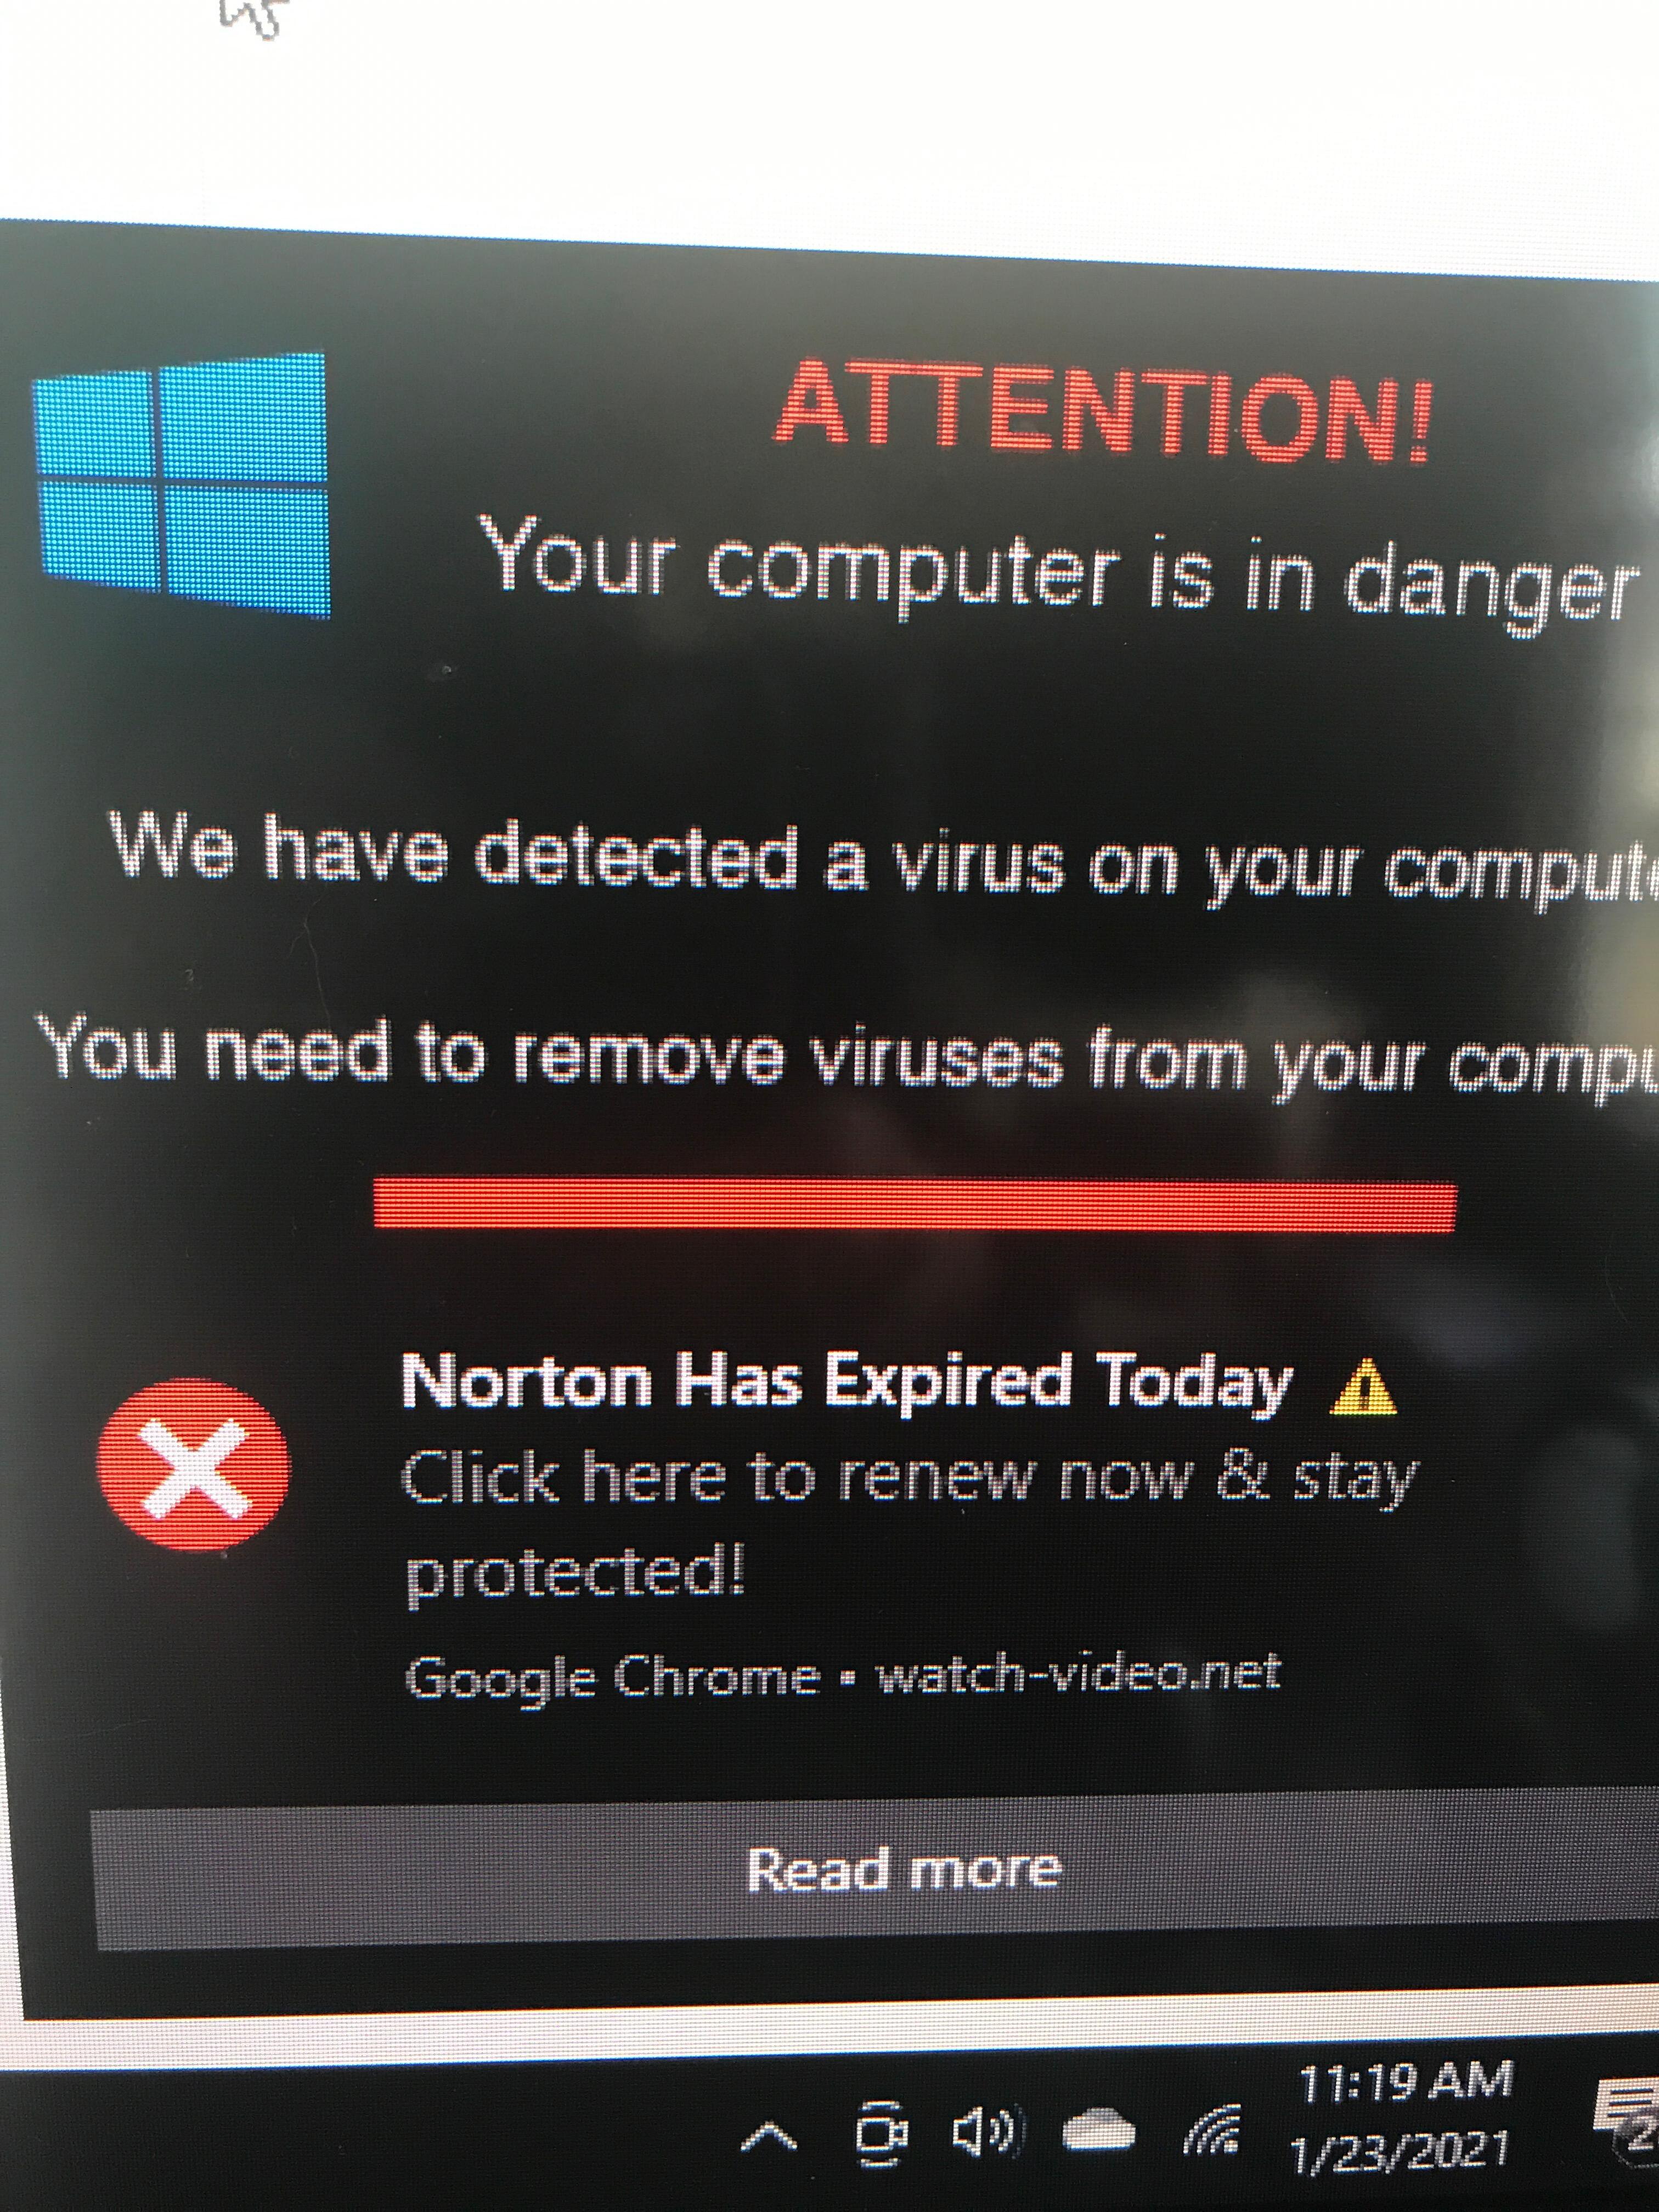 Malware removal tools: Utilize reputable anti-malware software such as Malwarebytes or Norton to scan and remove any instances of bdcamsetup_jpn.exe malware.
System Restore: Roll back your computer to a previous state before the bdcamsetup_jpn.exe errors occurred using the System Restore feature in Windows.